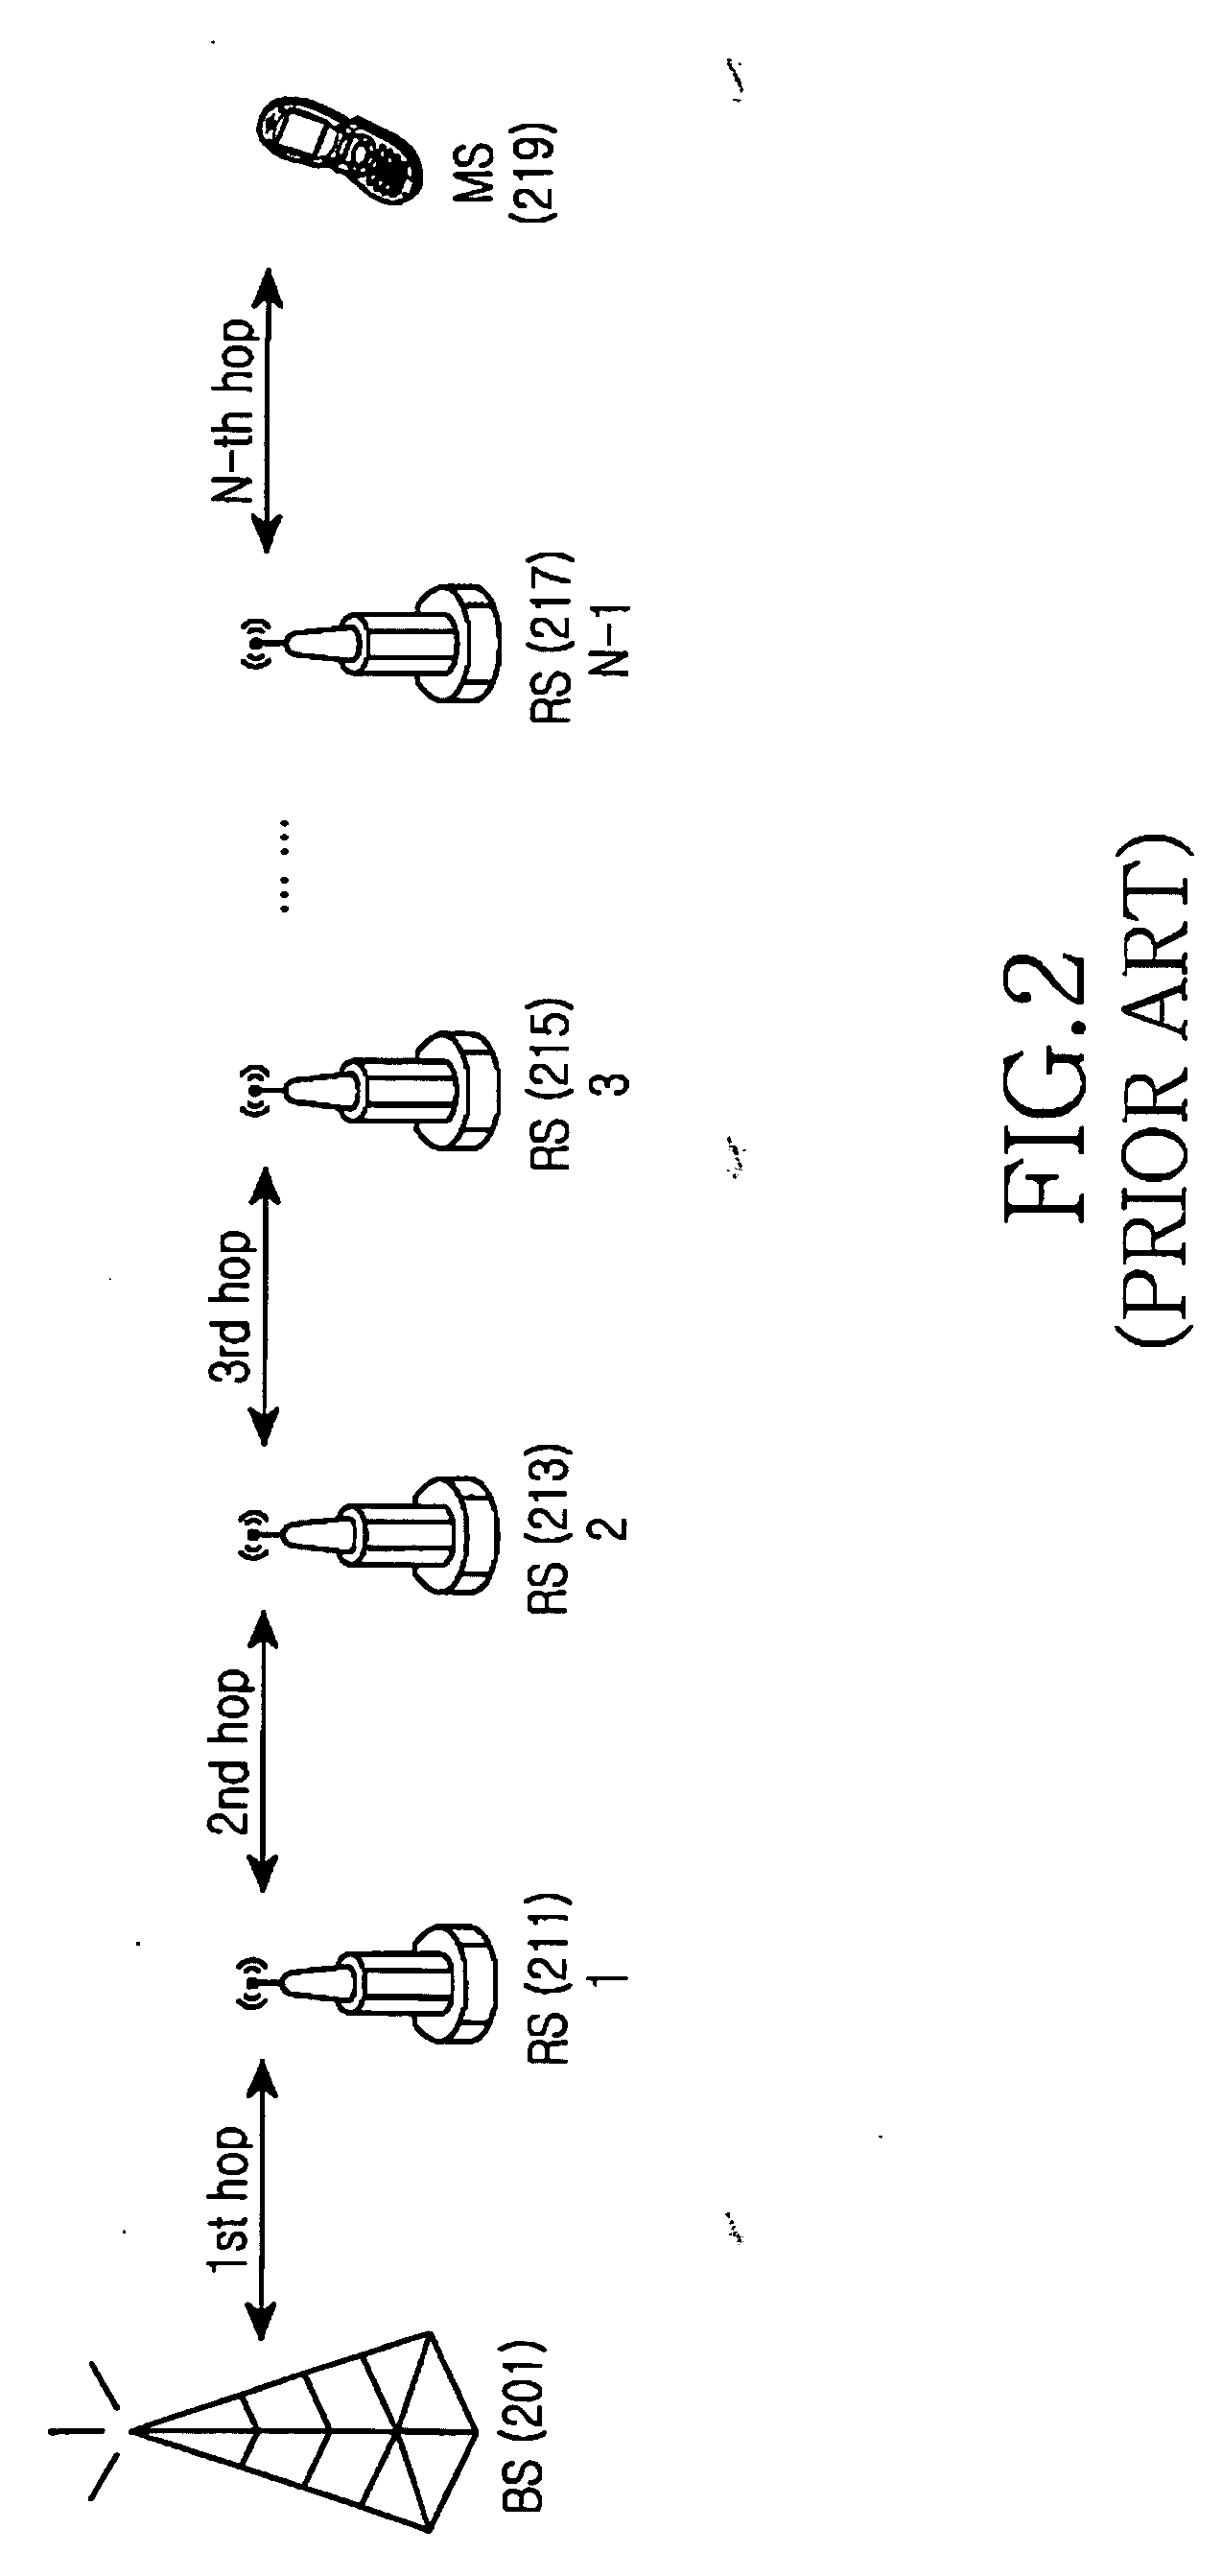 Apparatus and method for supporting multiple links by grouping multiple hops in a multi-hop relay cellular network